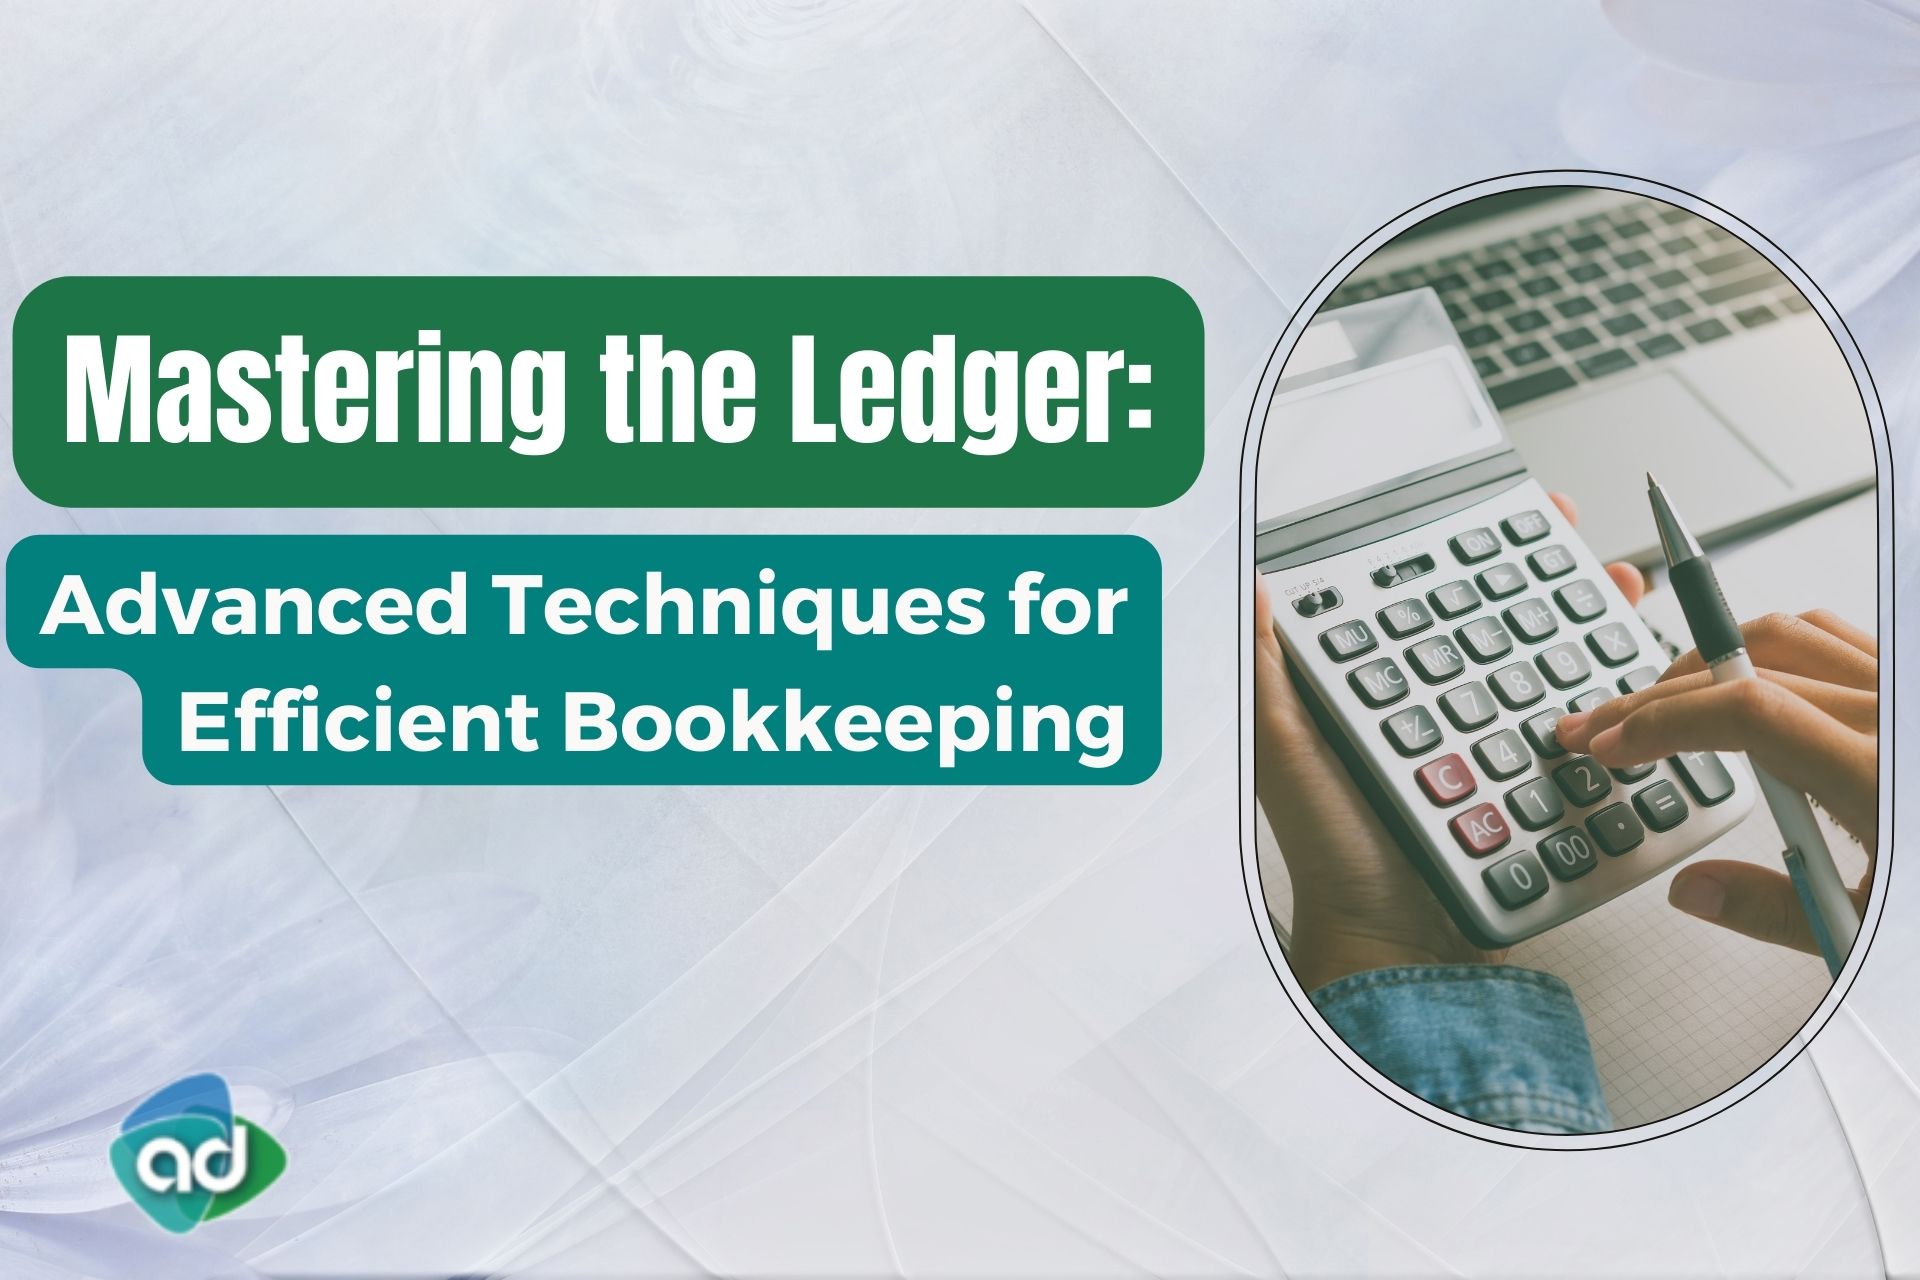 Mastering the Ledger: Advanced Techniques for Efficient Bookkeeping